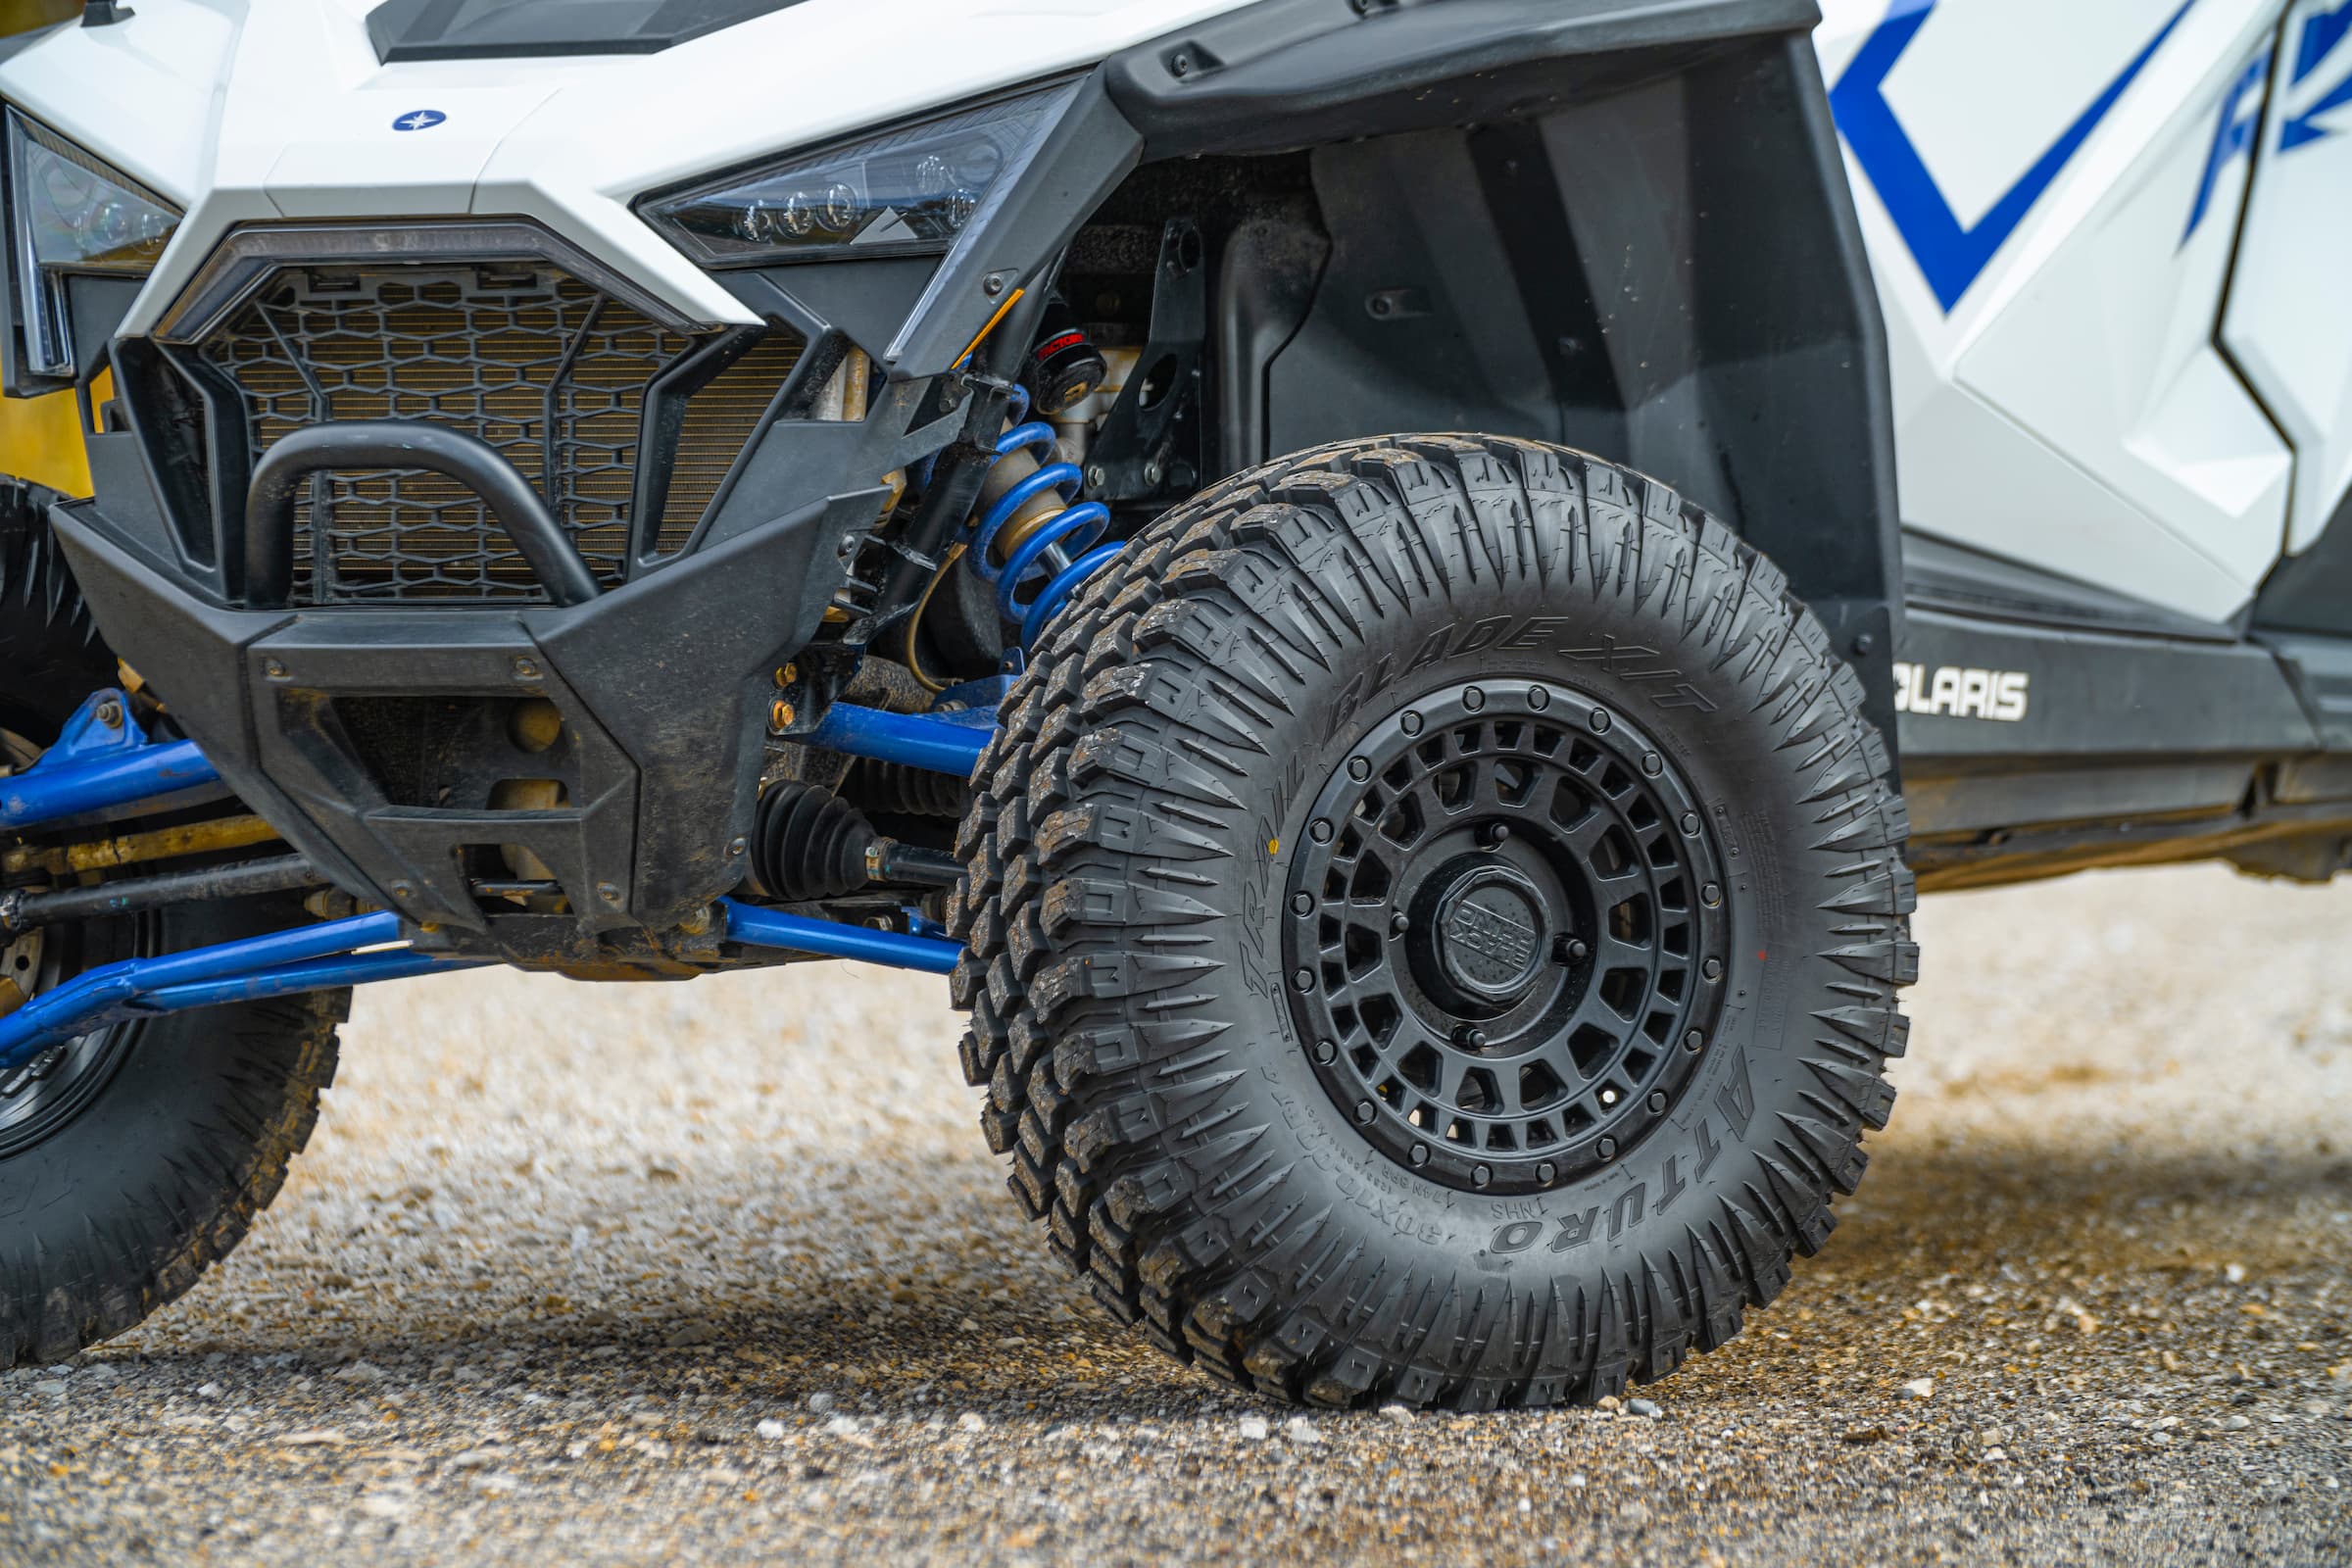 ATTURO ENTERS THE POWERSPORTS MARKET WITH 2 NEW TIRES FOR SIDE-BY-SIDES AND UTVS